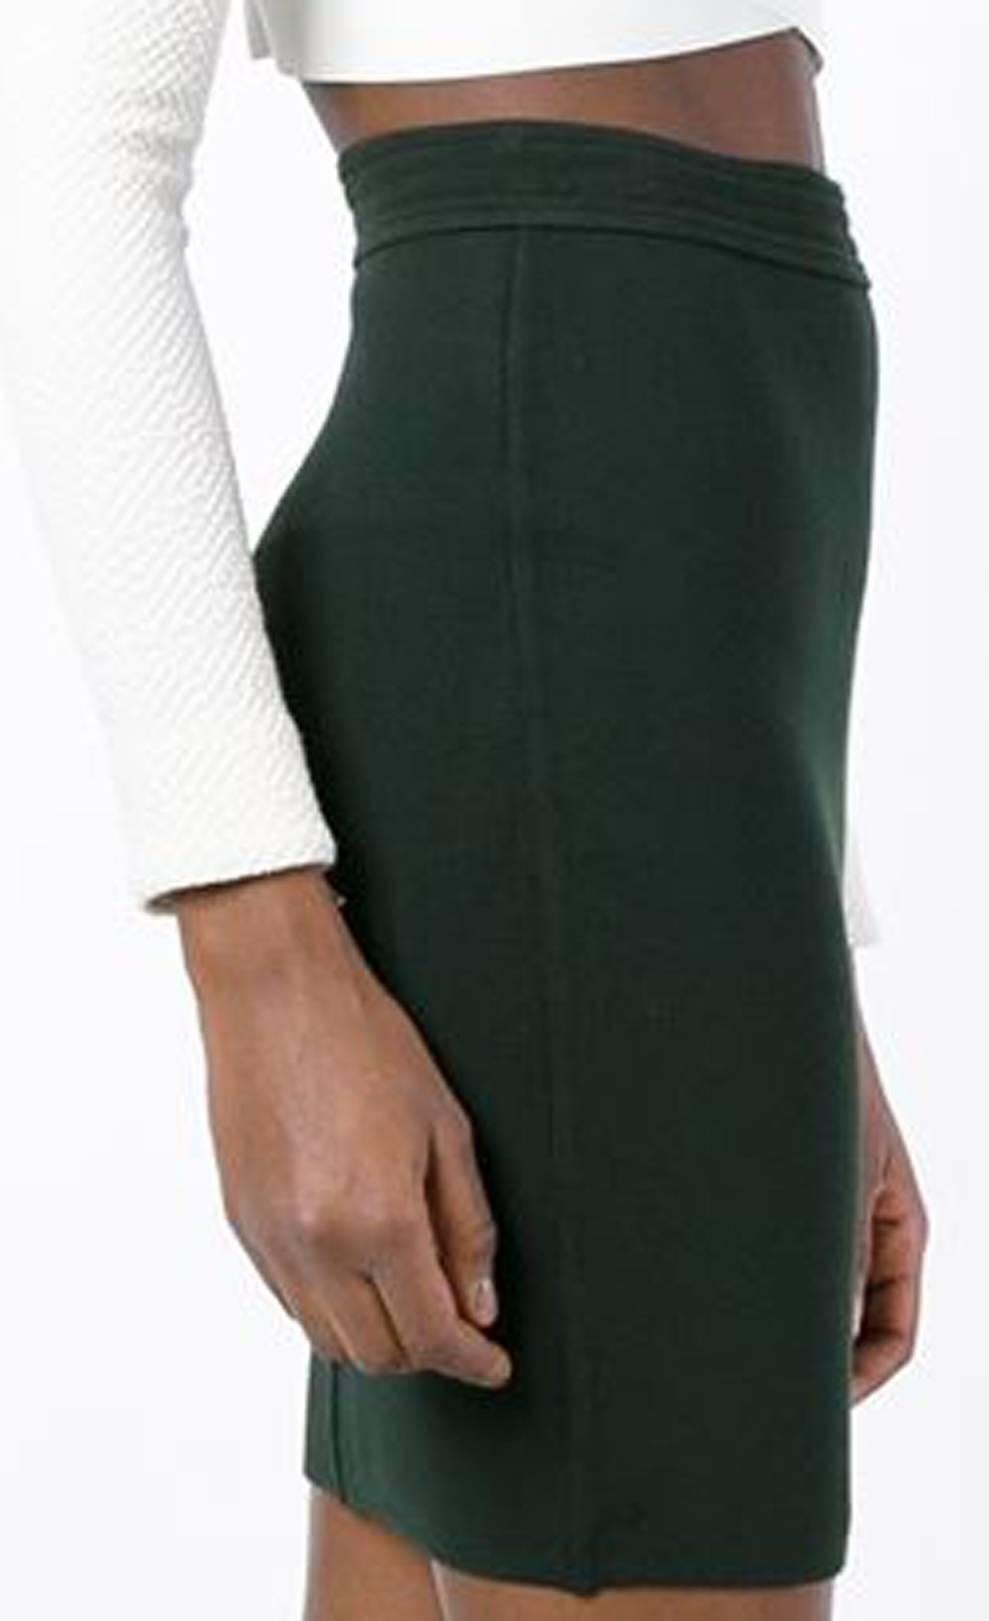 Azzedine Alaia forest green wool classic pencil skirt featuring a high rise, a waistband, and a mid-length. Circa 1980. 
In excellent vintage condition. Made in France.
Estimated size 36fr/ US4/ UK8
We guarantee you will receive this gorgeous item